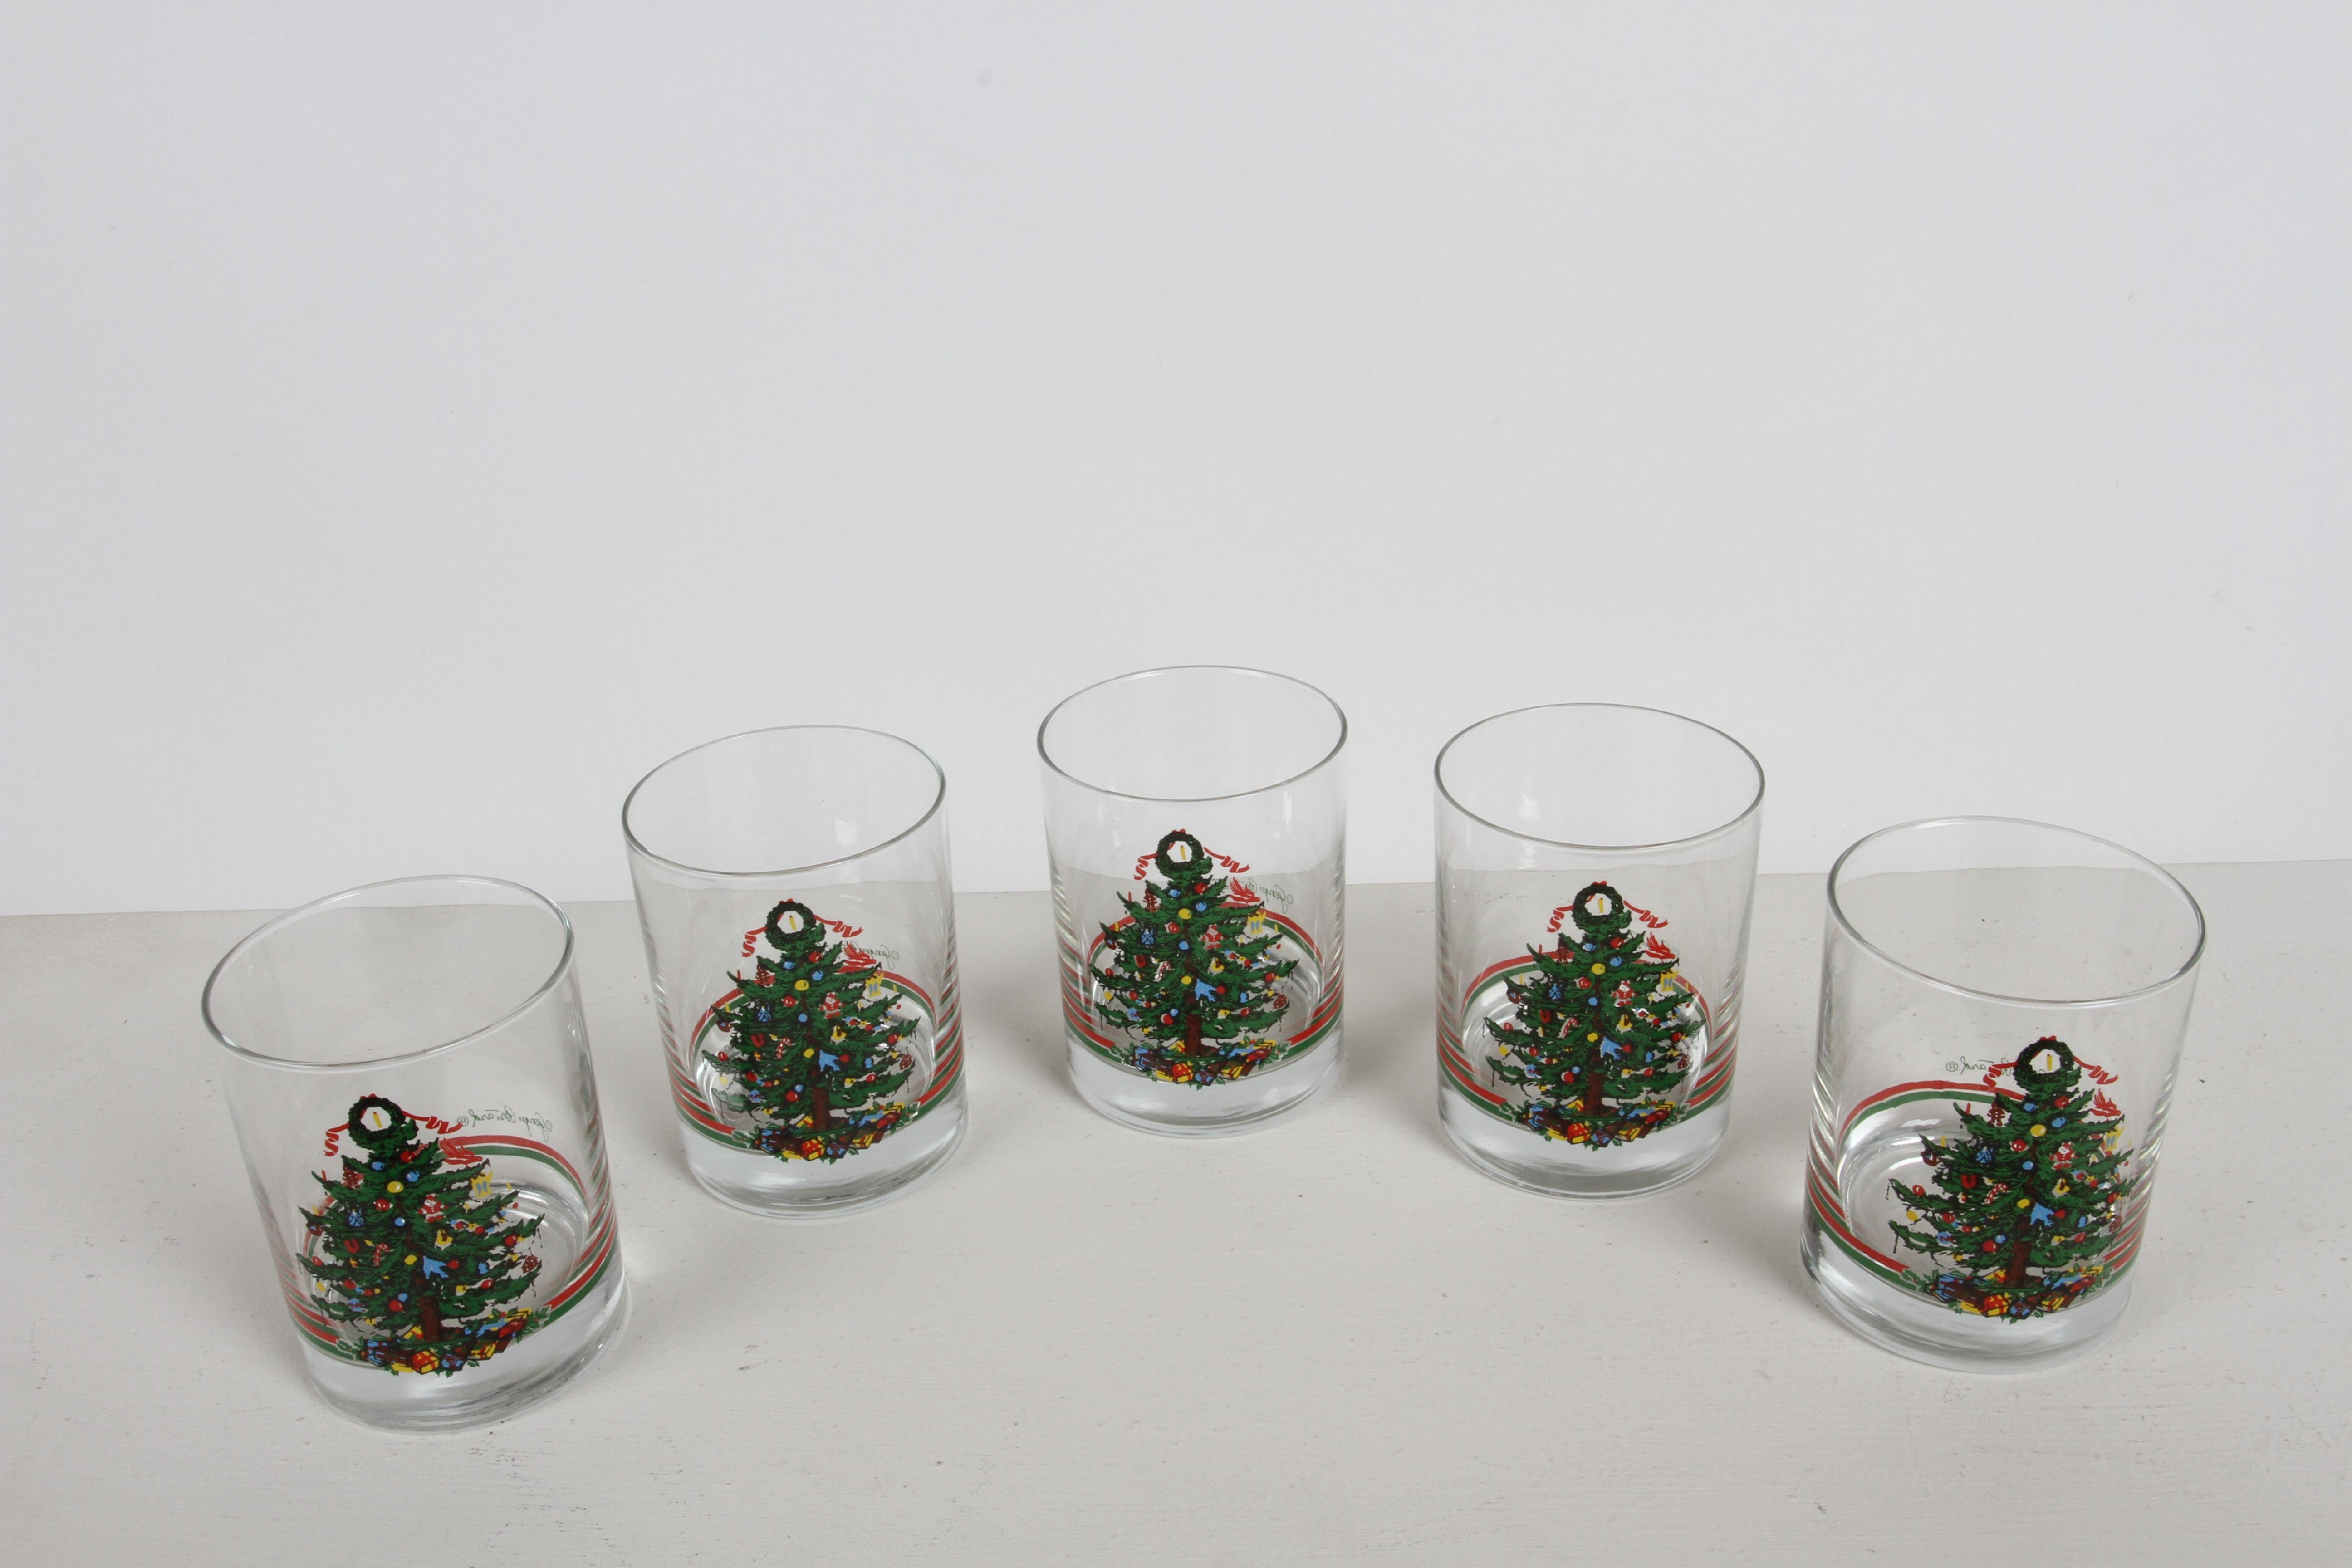 Vintage 1980s Christmas / Holiday theme barware glasses by Georges Briard and retailed by Neiman Marcus. Set of 5 rocks, old fashion or low balls glasses. X-mas trees trimmed with ornaments, like ginger bread man and candy canes with presents under